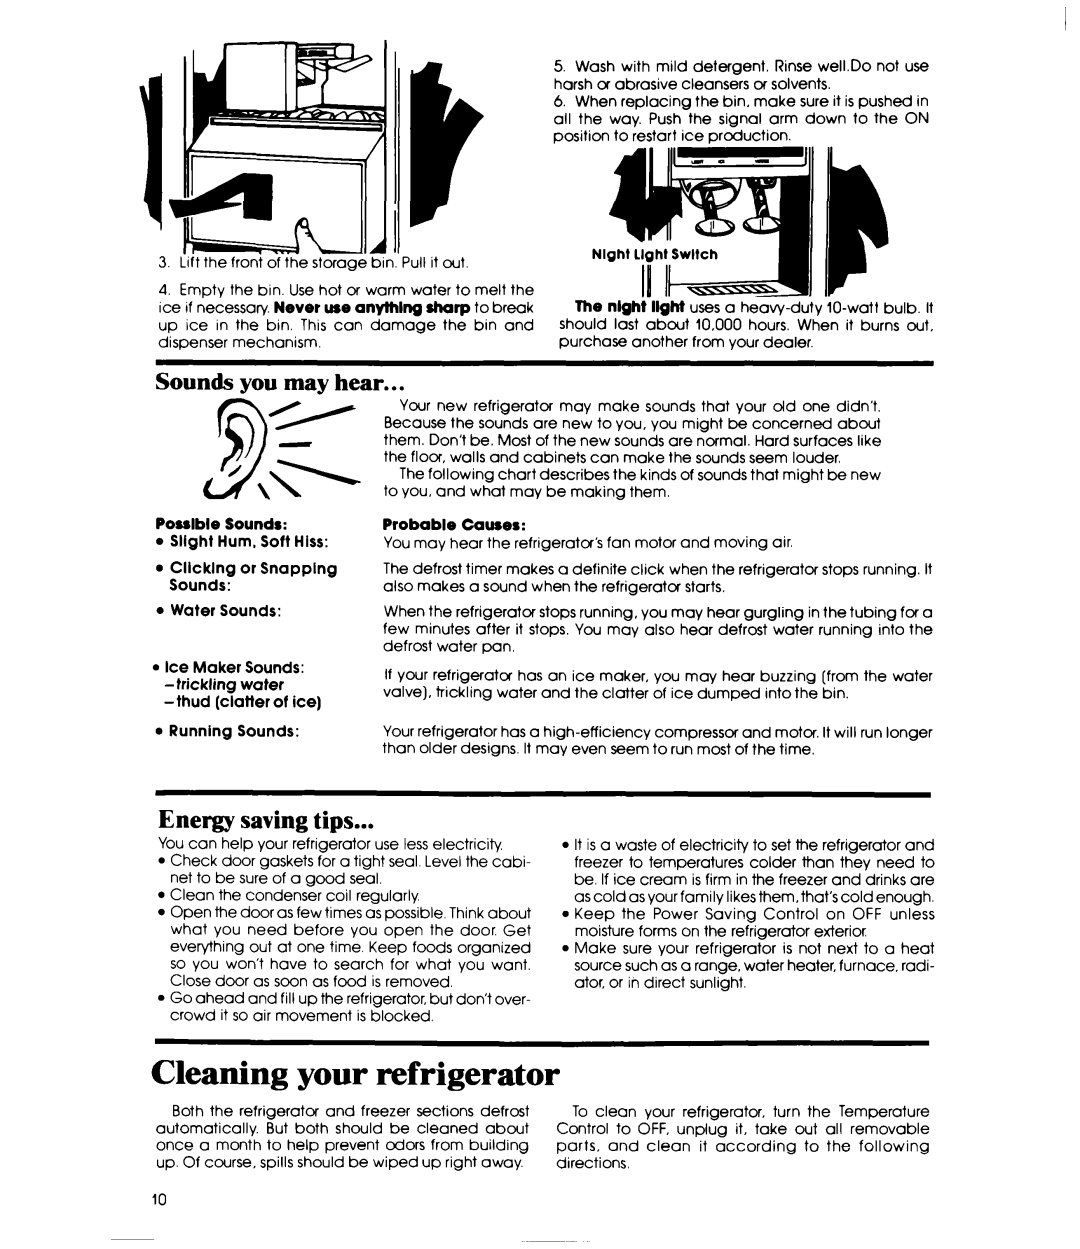 Whirlpool ED22EM Cleaning your refrigerator, Sounds you may hear, Energy saving tips, Probable Causes, l Running Sounds 